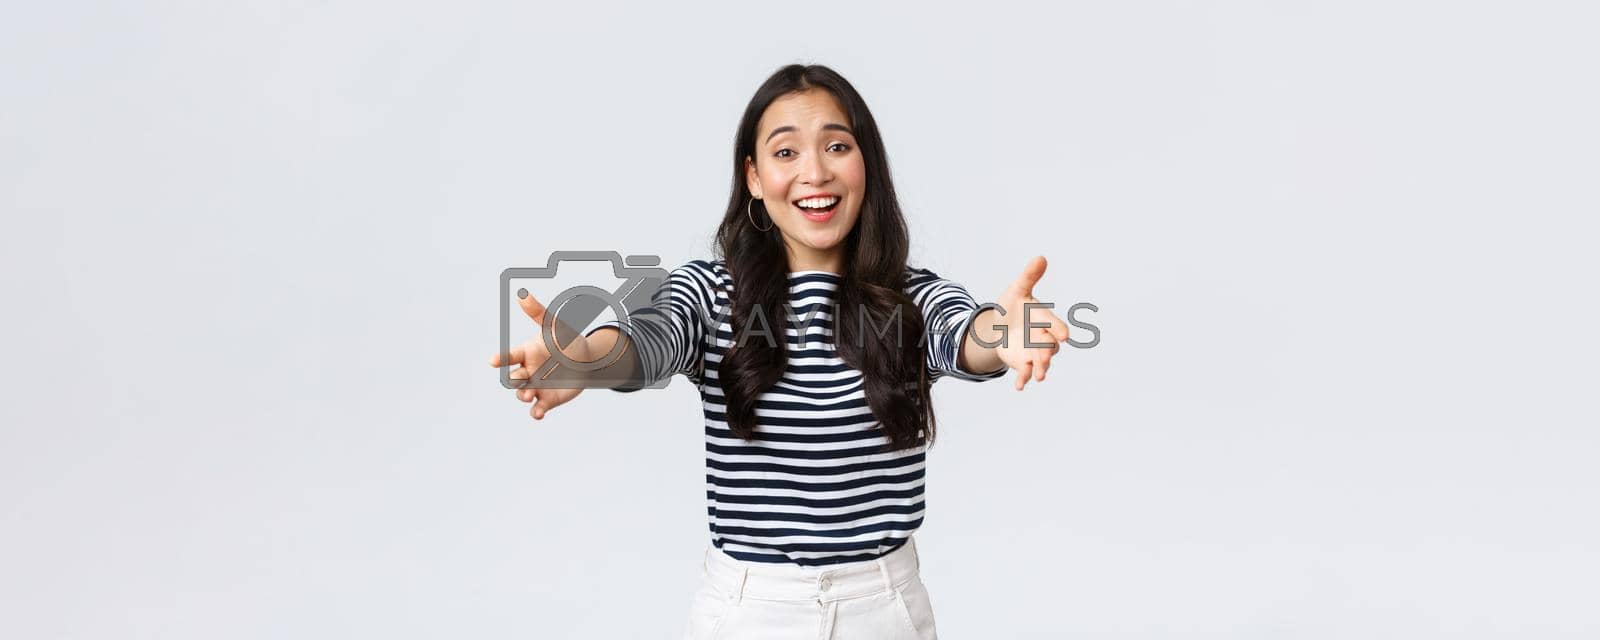 Lifestyle, people emotions and casual concept. Friendly charming asian girl reaching hands forward to hold something, giving hug or embracing, standing white background.